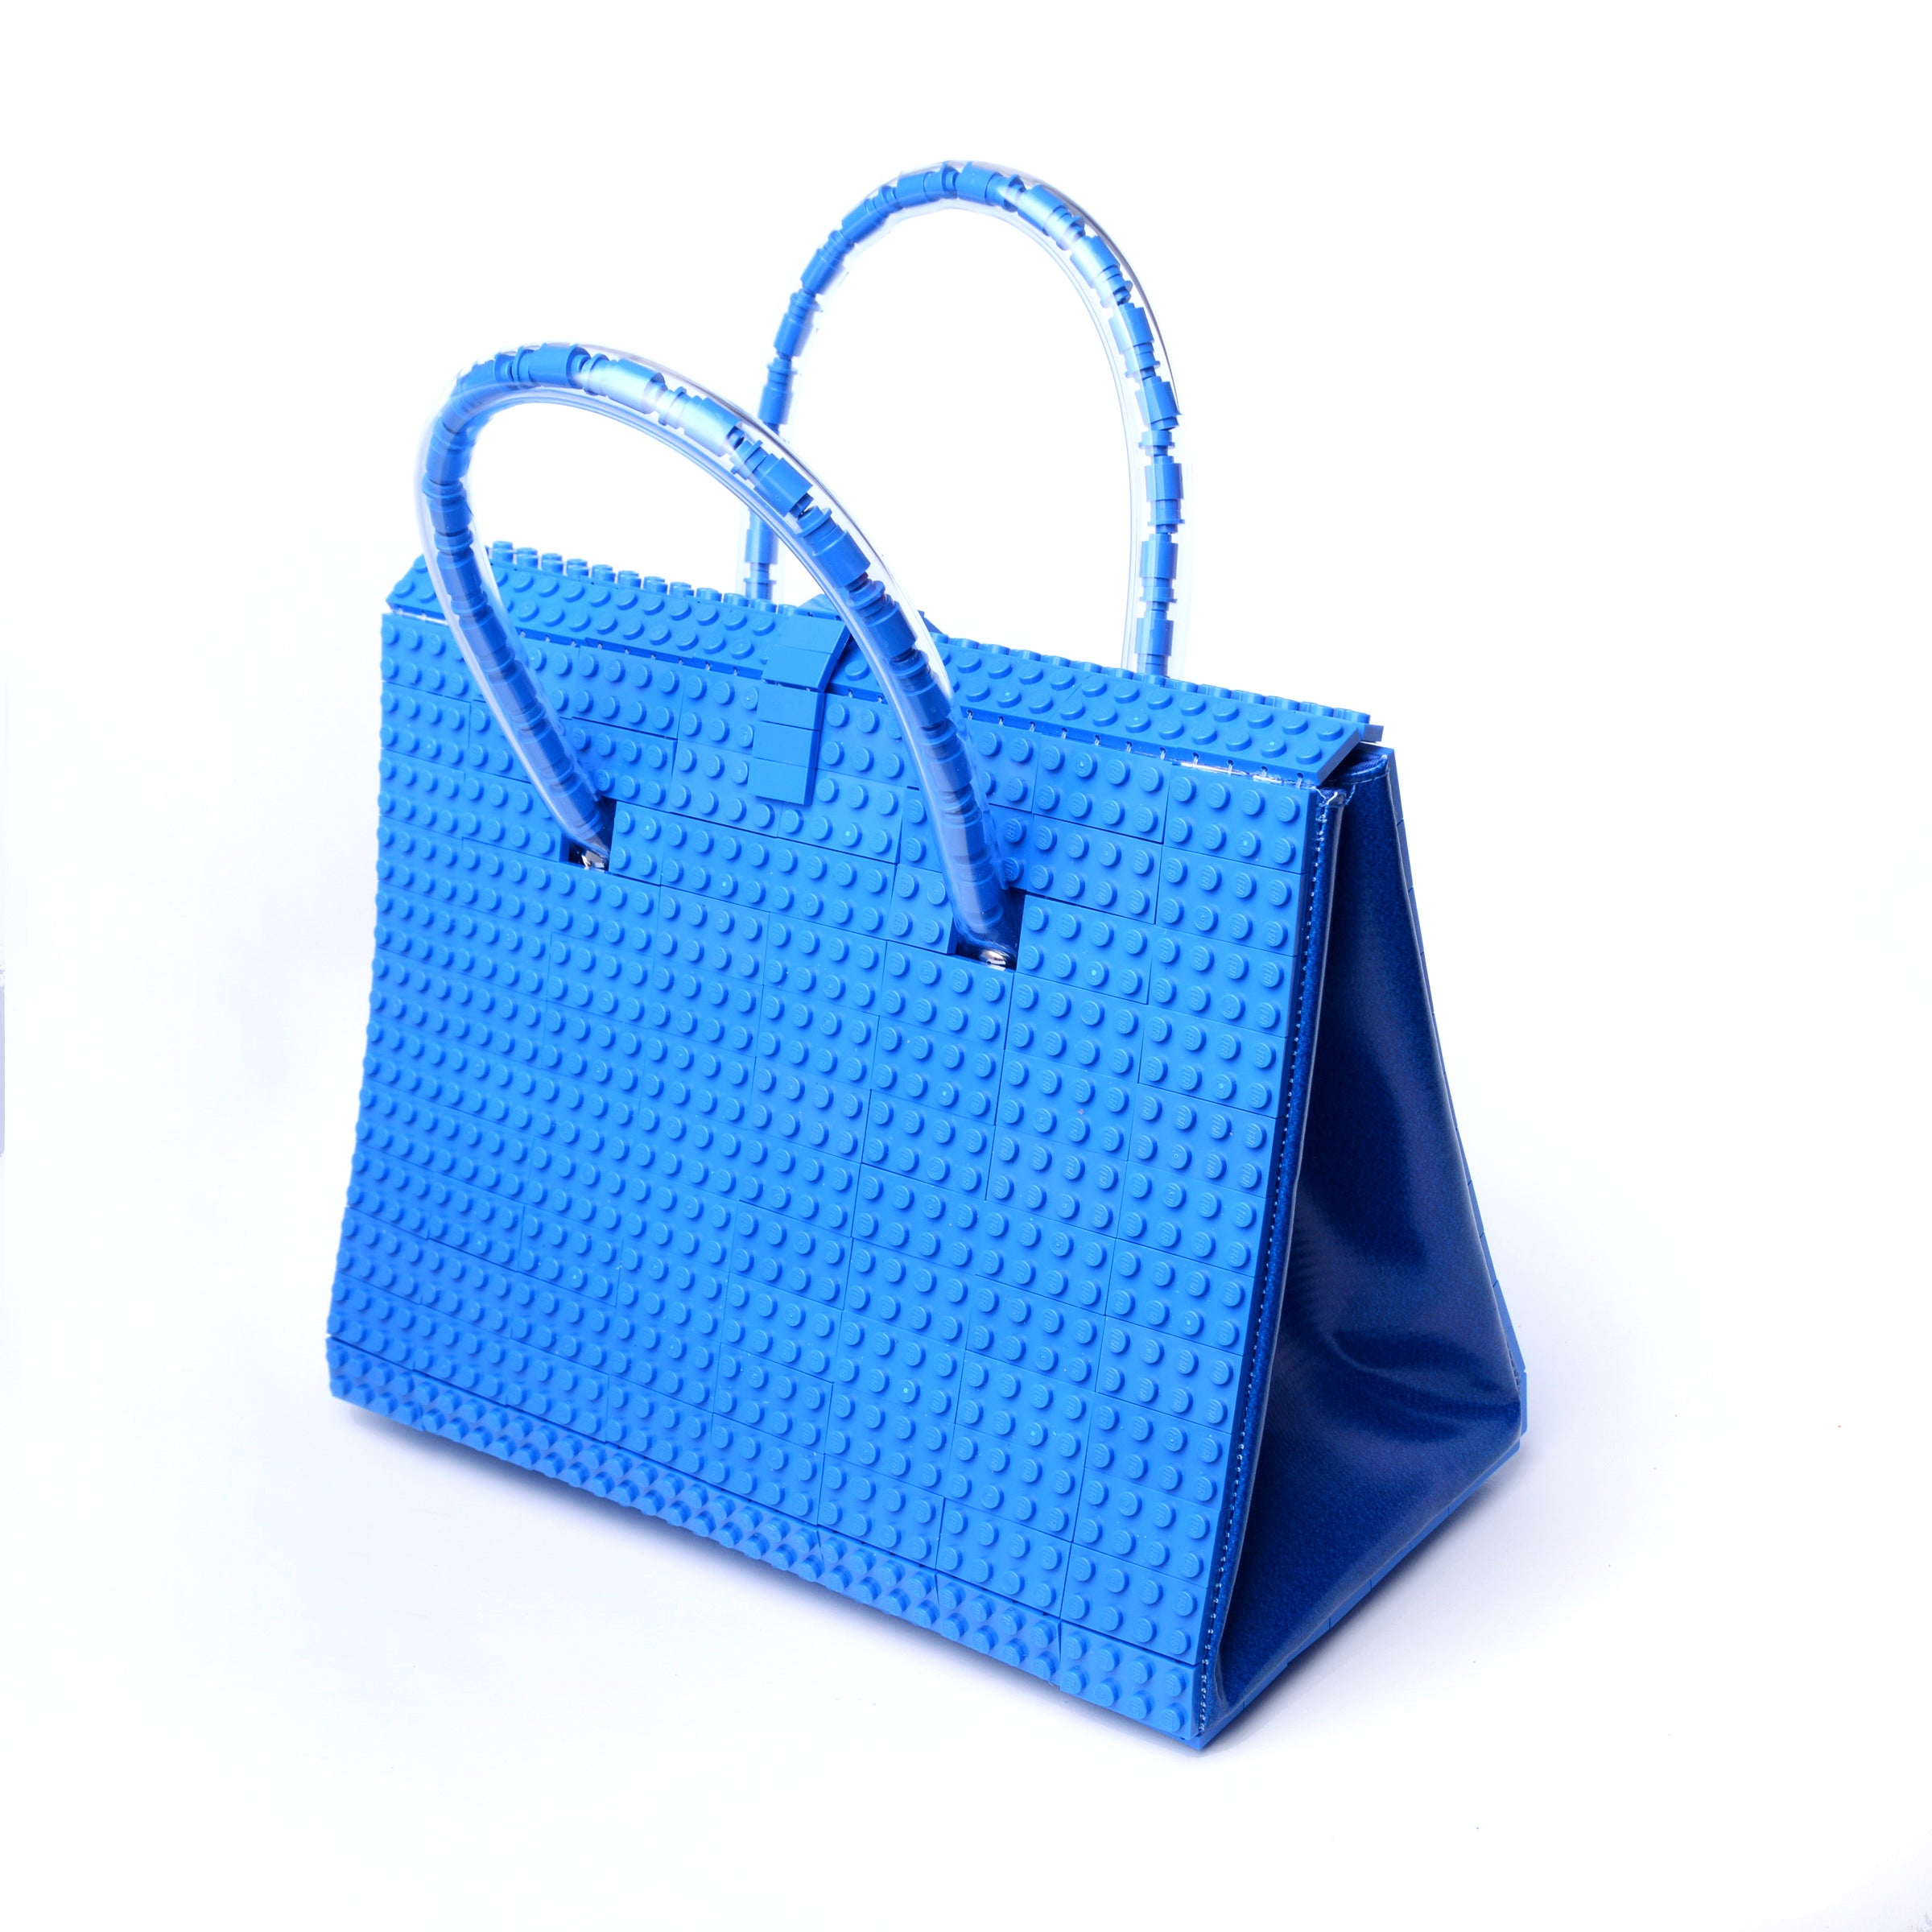 The Brick Bag: A Purse Made from LEGO